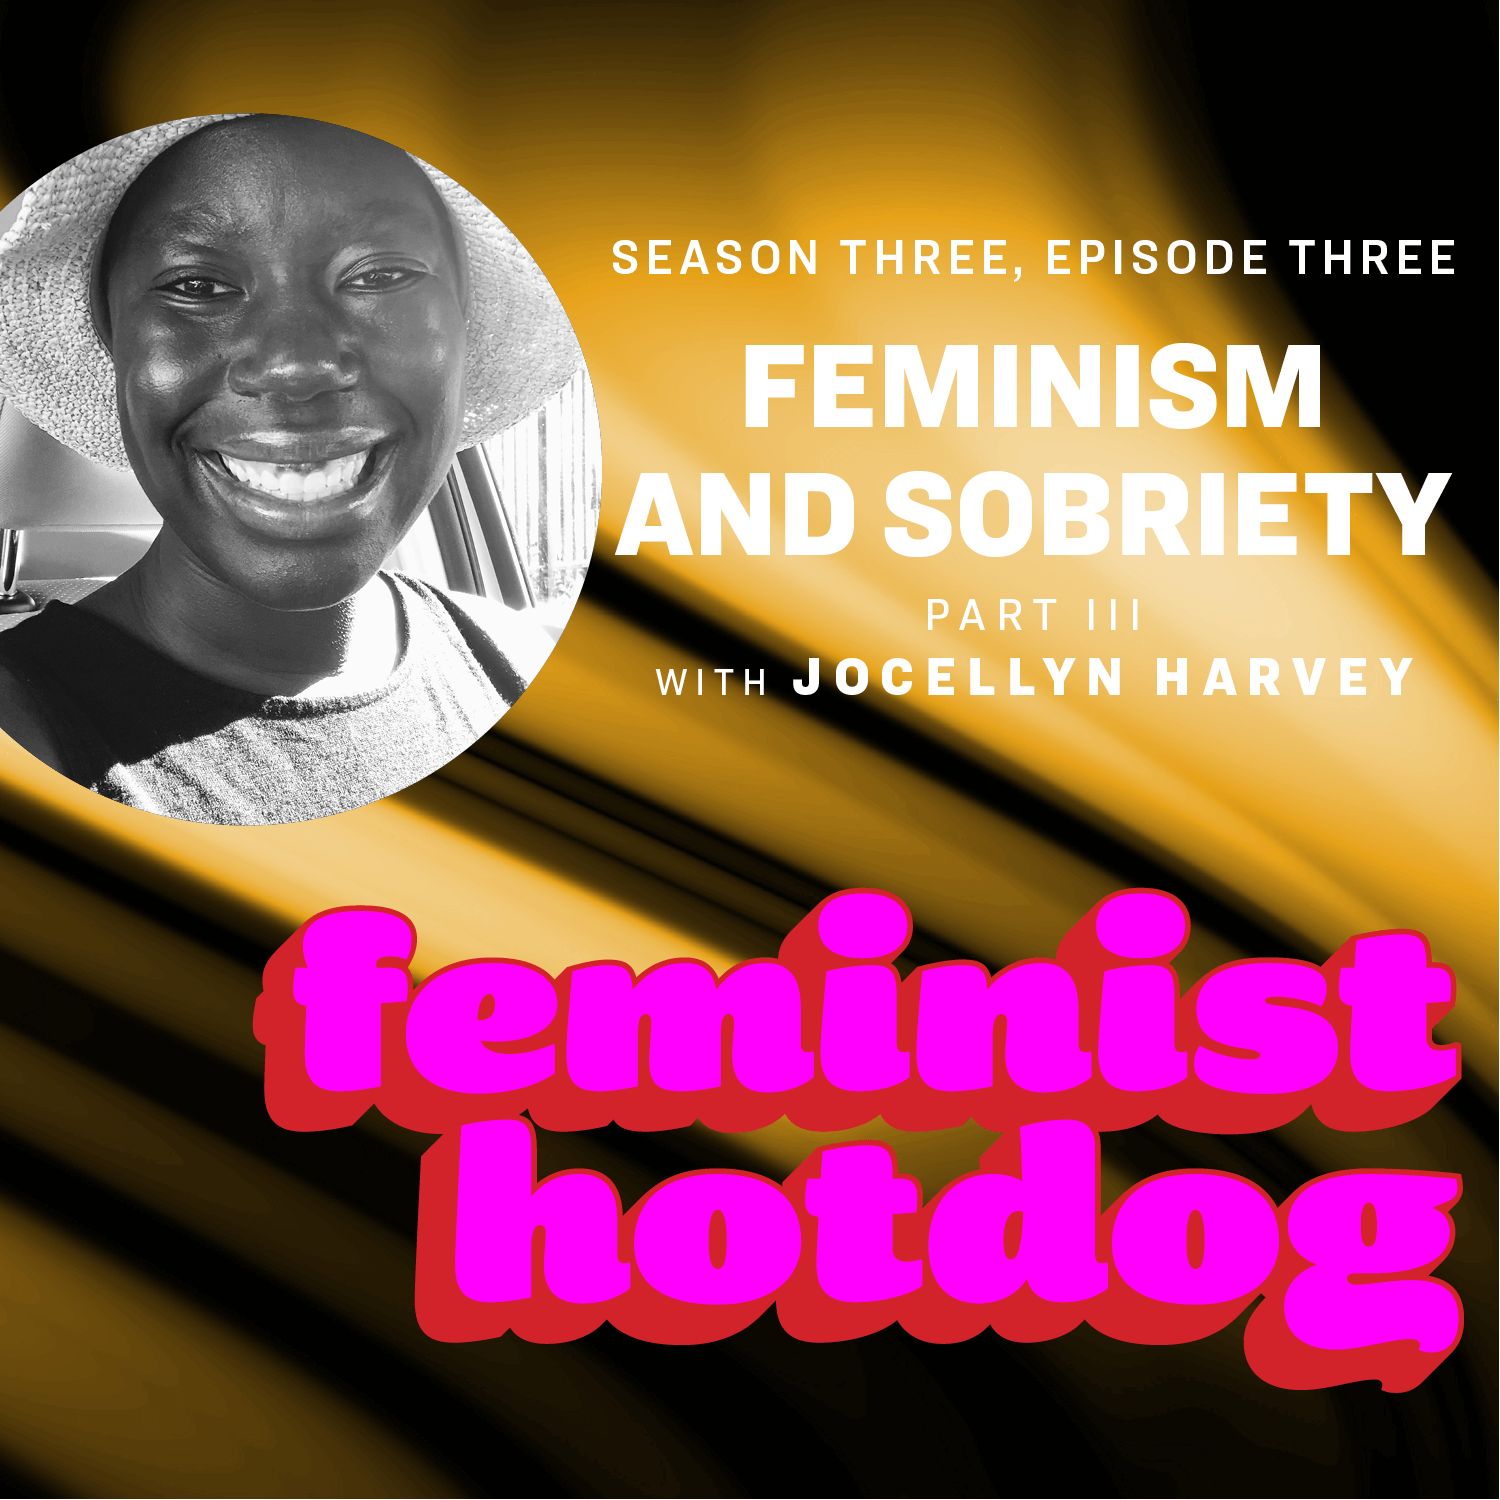 Feminism and Sobriety - Part III with Jocellyn Harvey